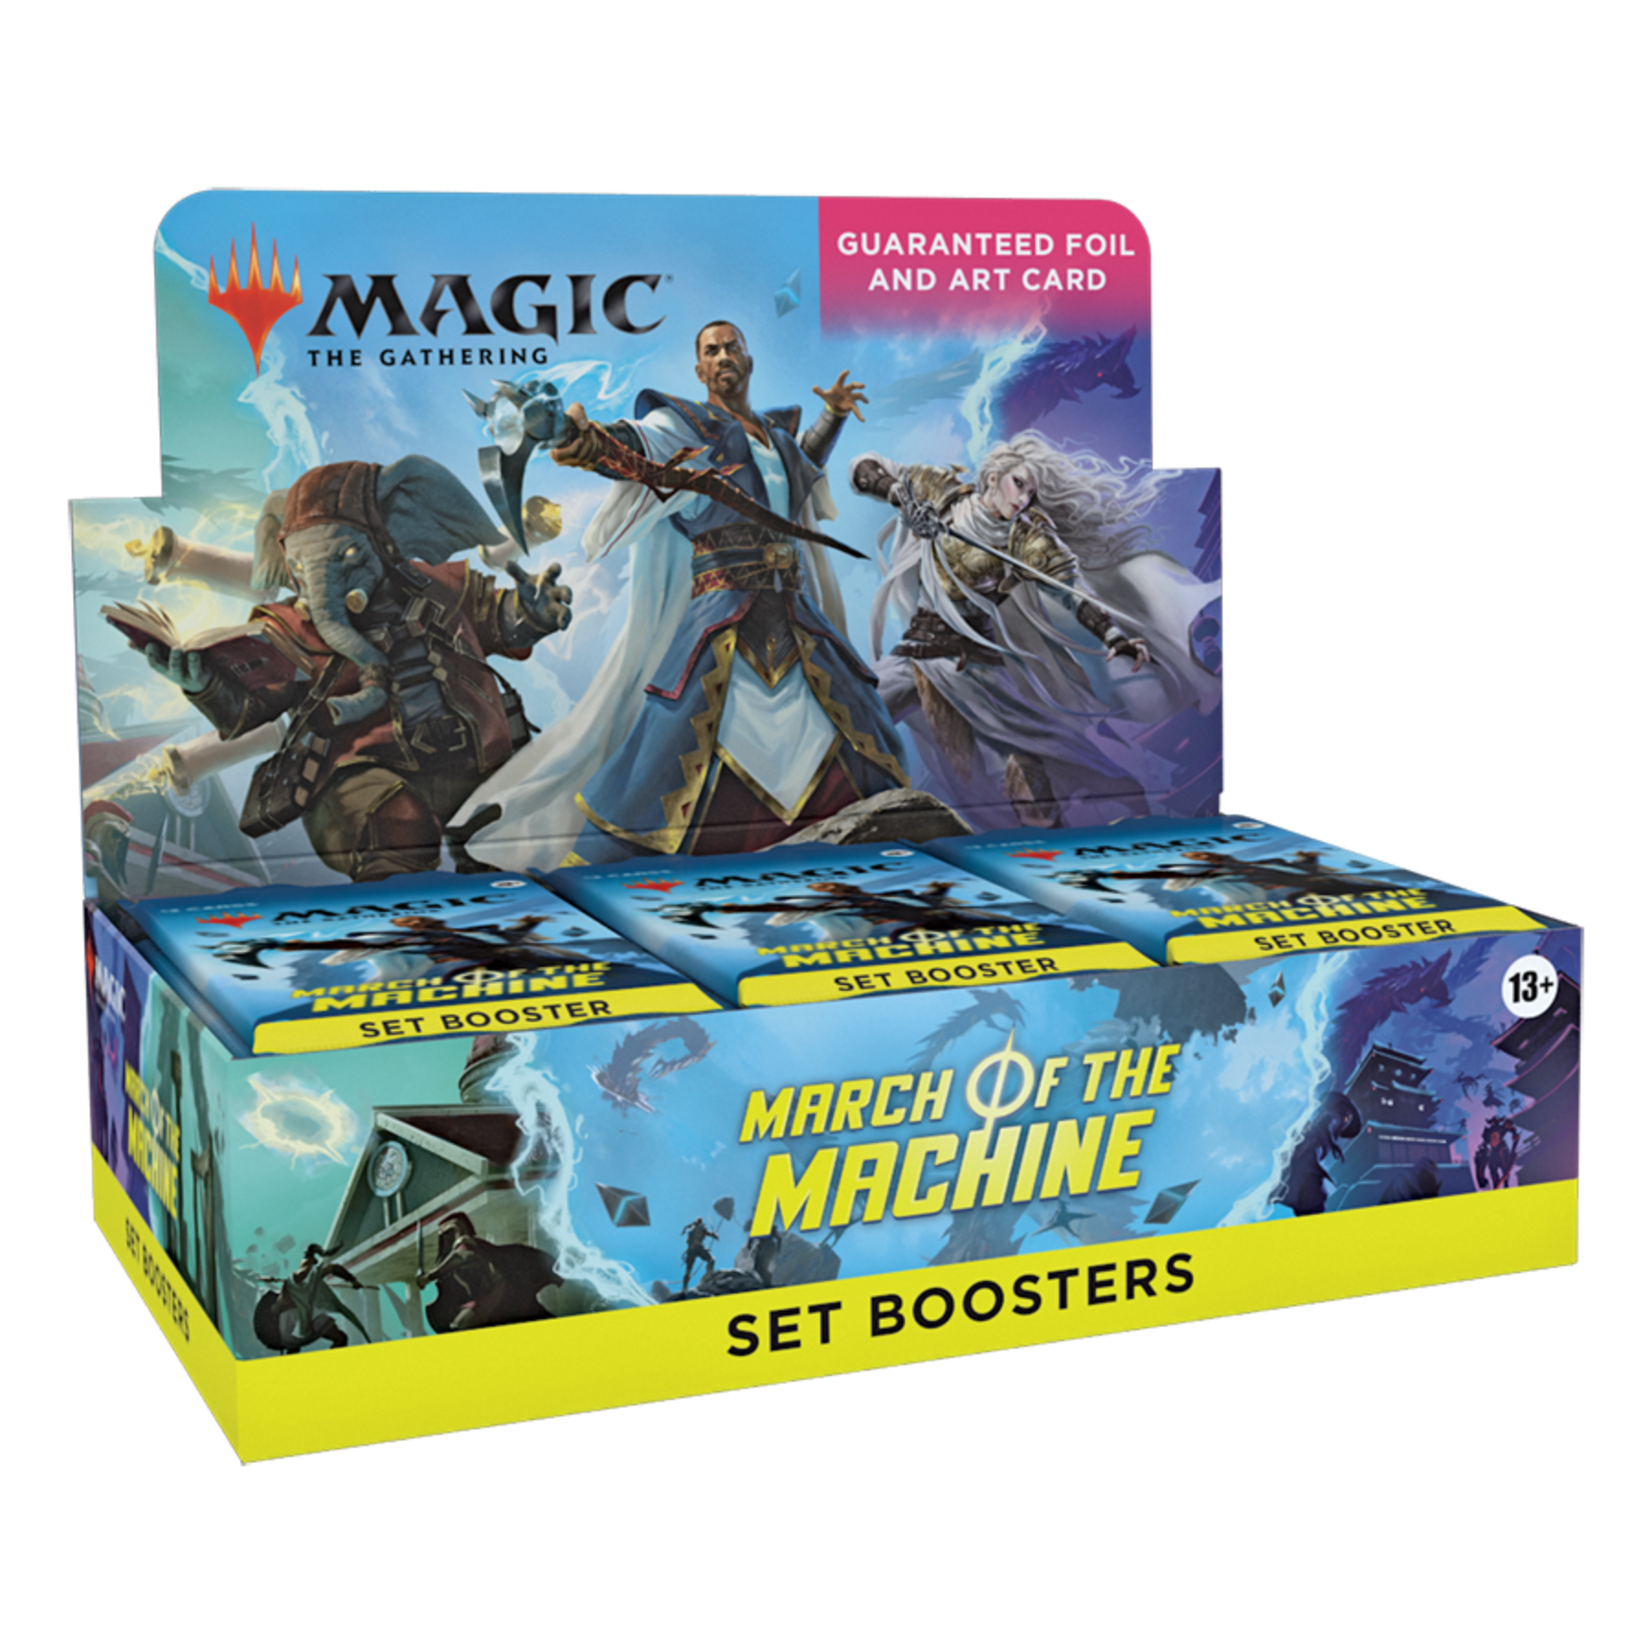 Wizards of the Coast Magic - March of the Machine Set Booster Box